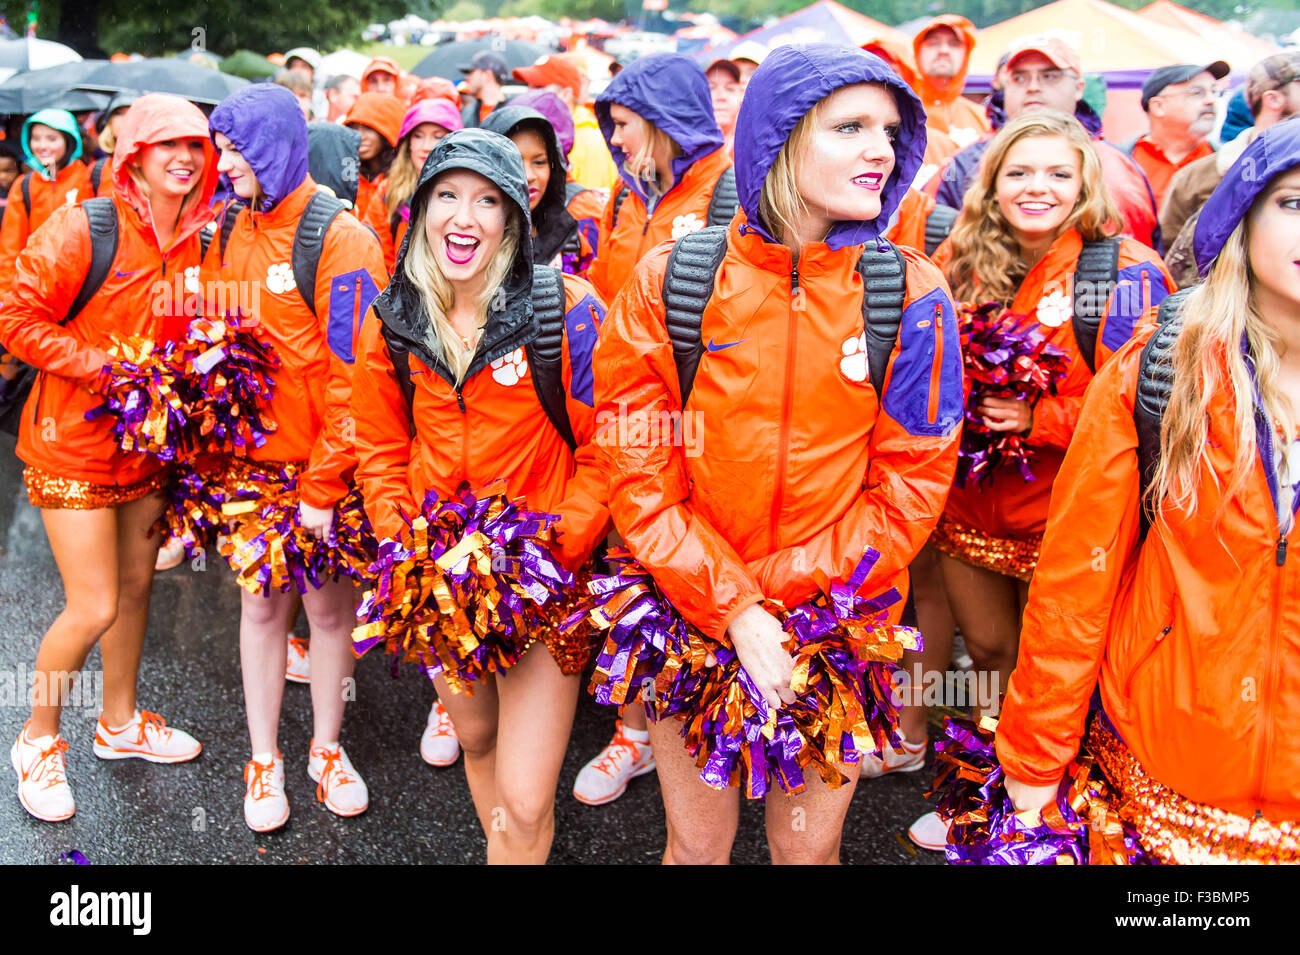 Clemson cheerleaders entertaining the crowd gathered outside Memorial stadium for Tiger Walk prior to the NCAA Football game between Notre Dame and Clemson at Death Valley in Clemson, SC. David Grooms/CSM Stock Photo